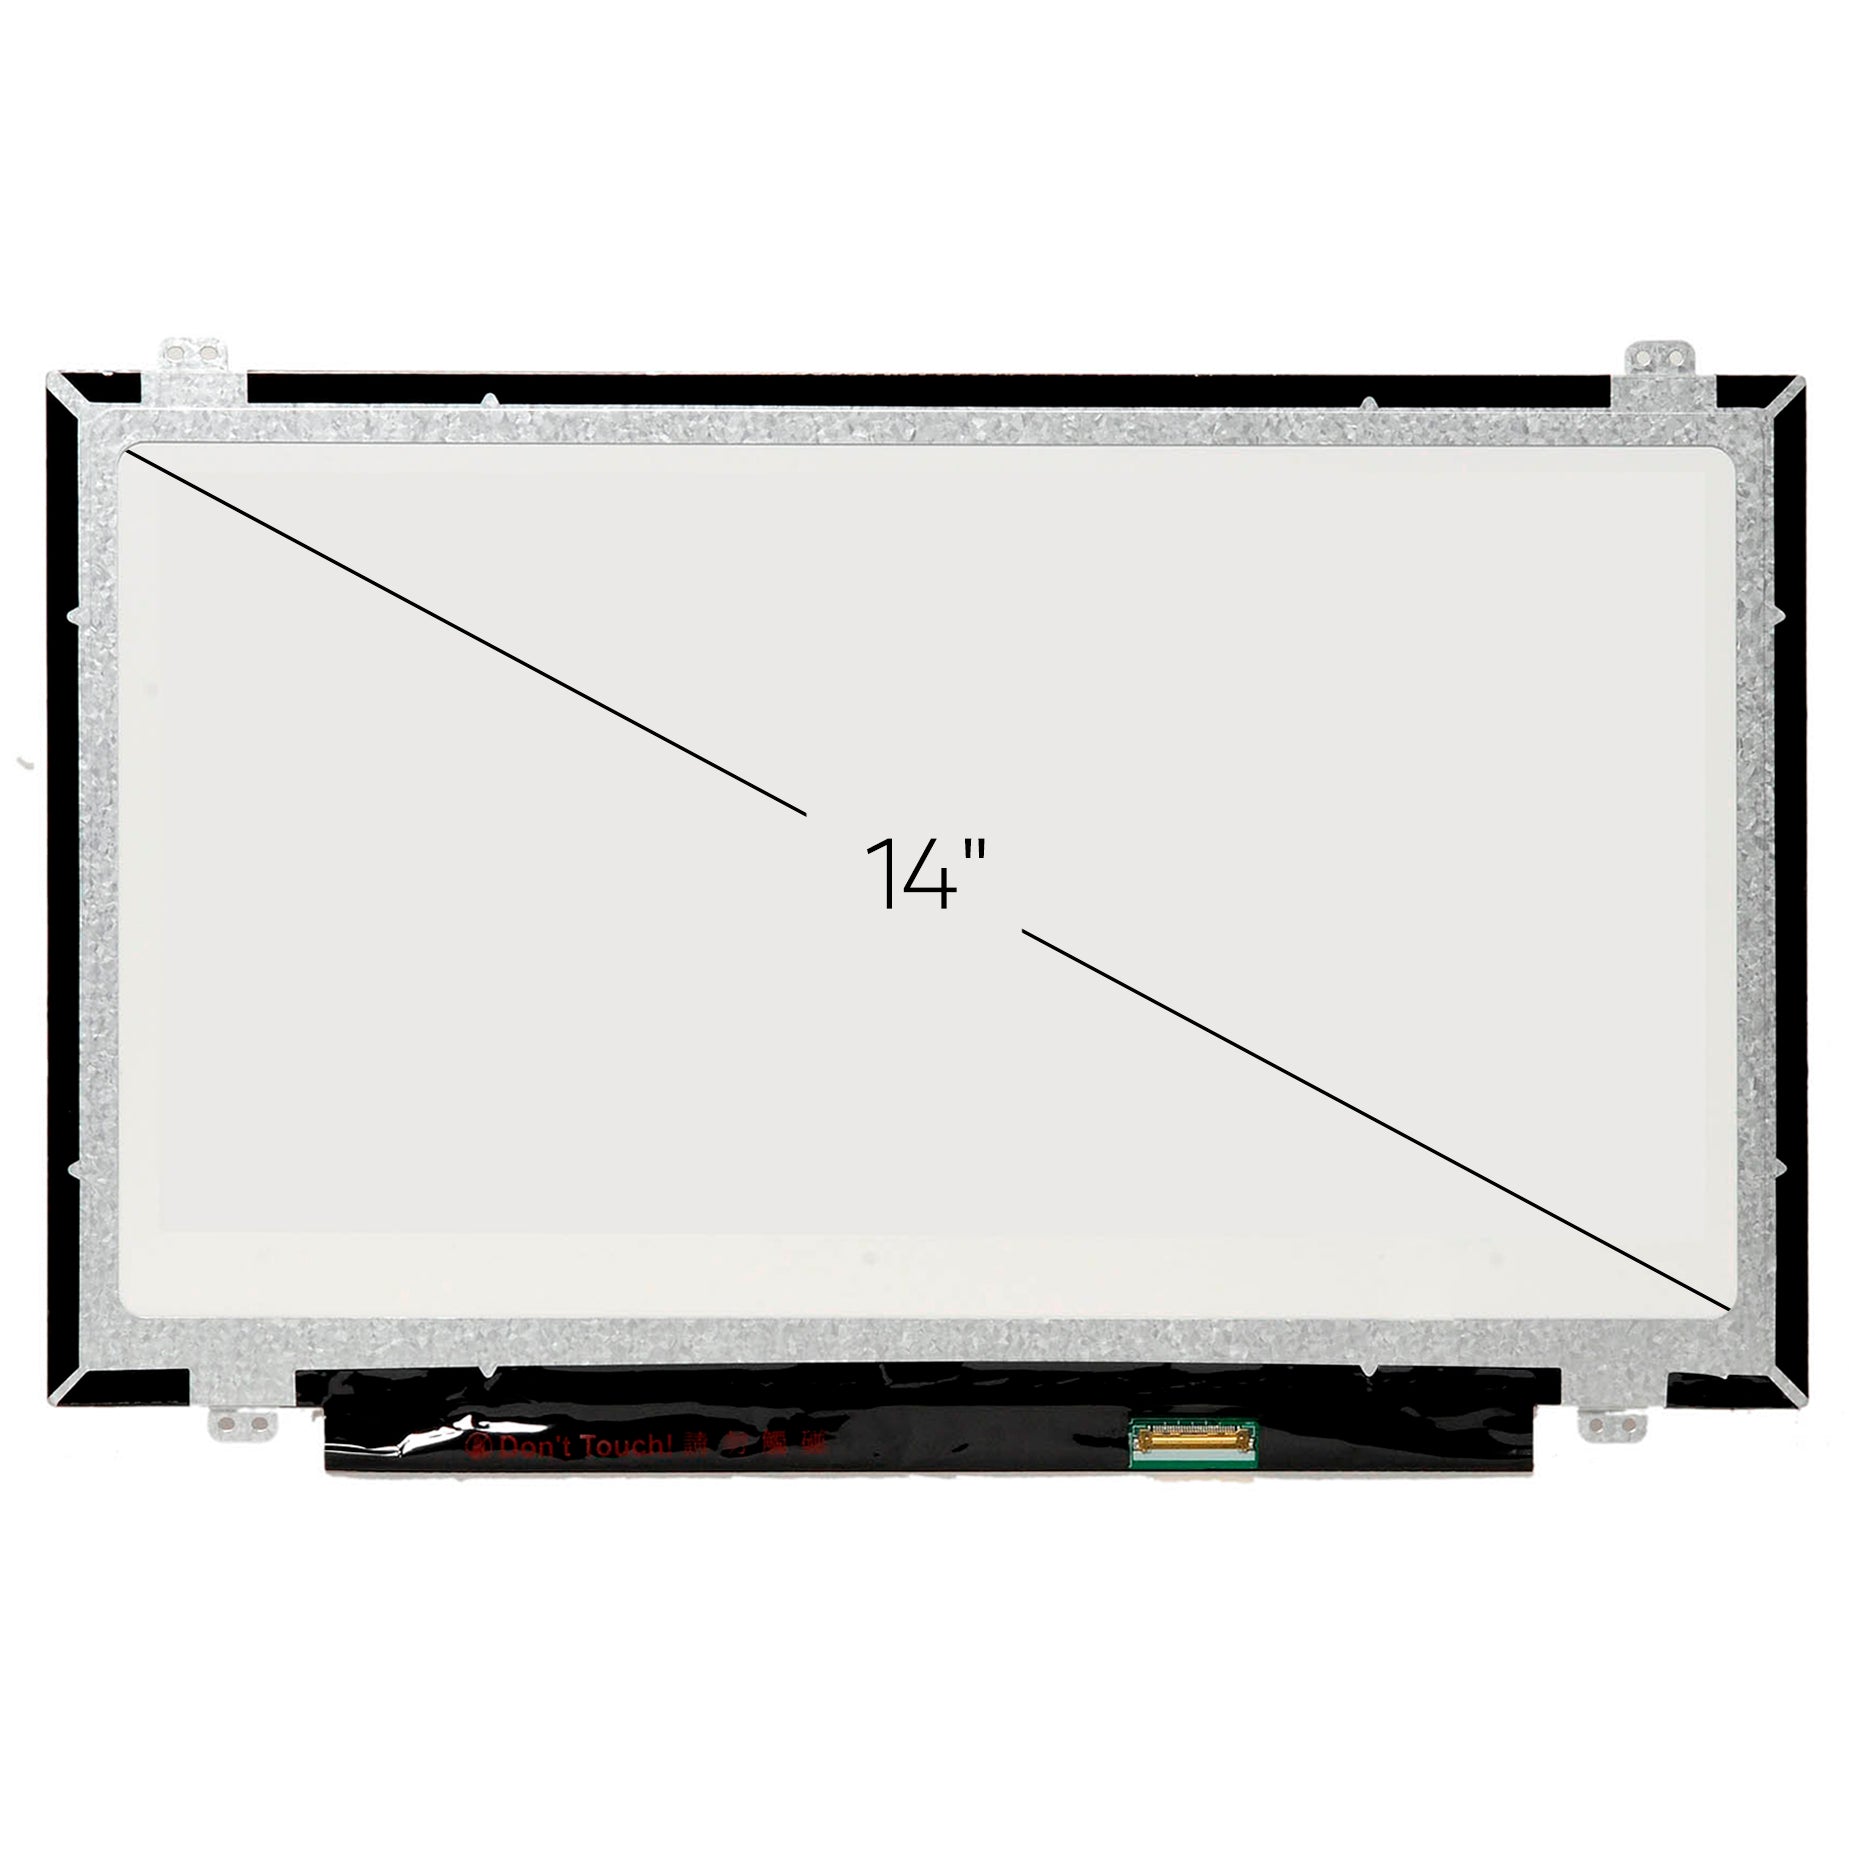 Screen Replacement for Dell P/N W92HV DP/N 0W92HV HD 1366x768 Glossy LCD LED Display